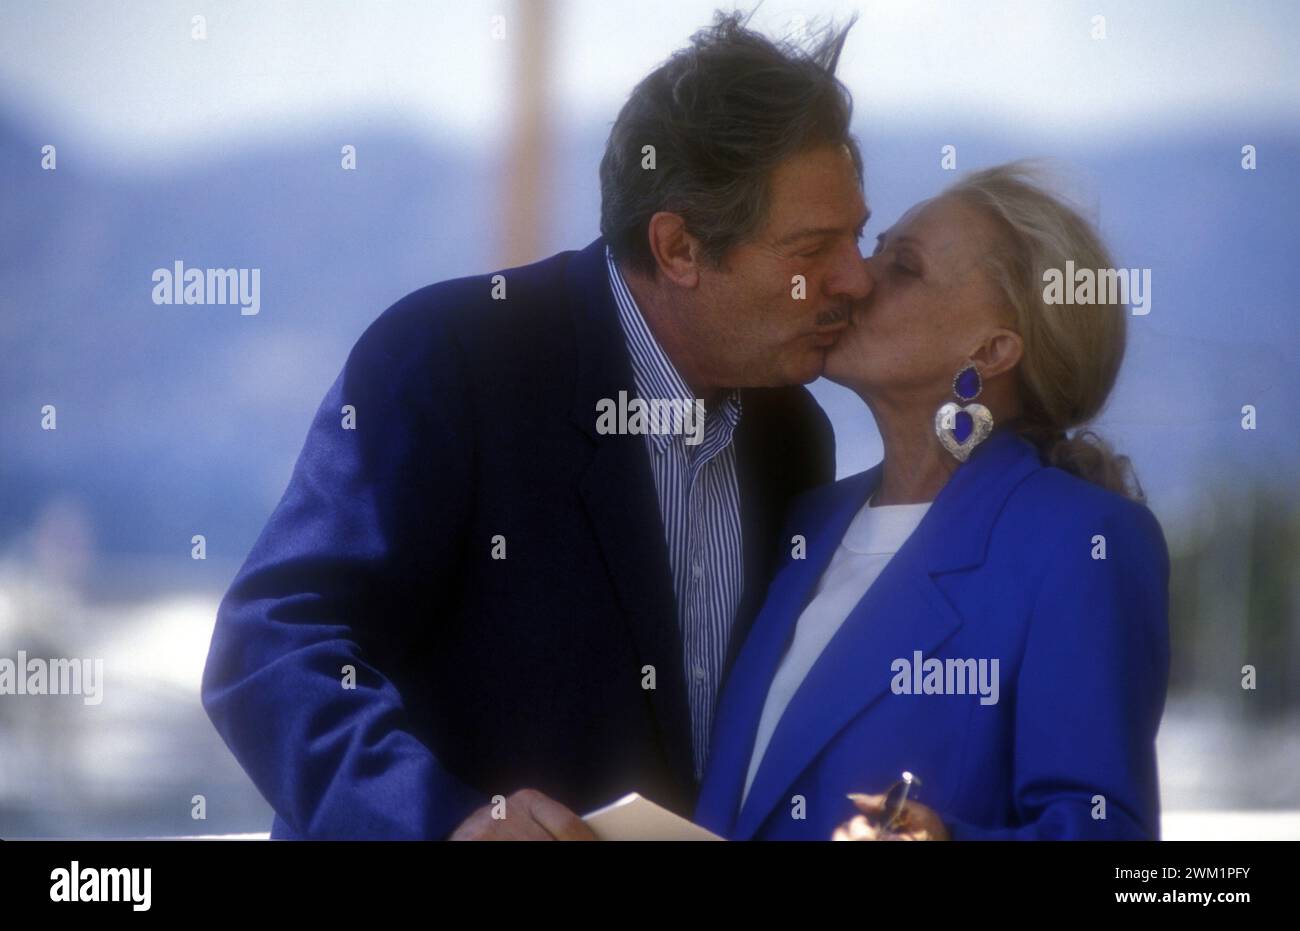 MME4703459 Comedians Marcello Mastroianni and Jeanne Moreau exchanging a kiss at the Cannes Film Festival in 1991.; (add.info.: Comedians Marcello Mastroianni and Jeanne Moreau exchanging a kiss at the Cannes Film Festival in 1991.); © Marcello Mencarini. All rights reserved 2023. Stock Photo